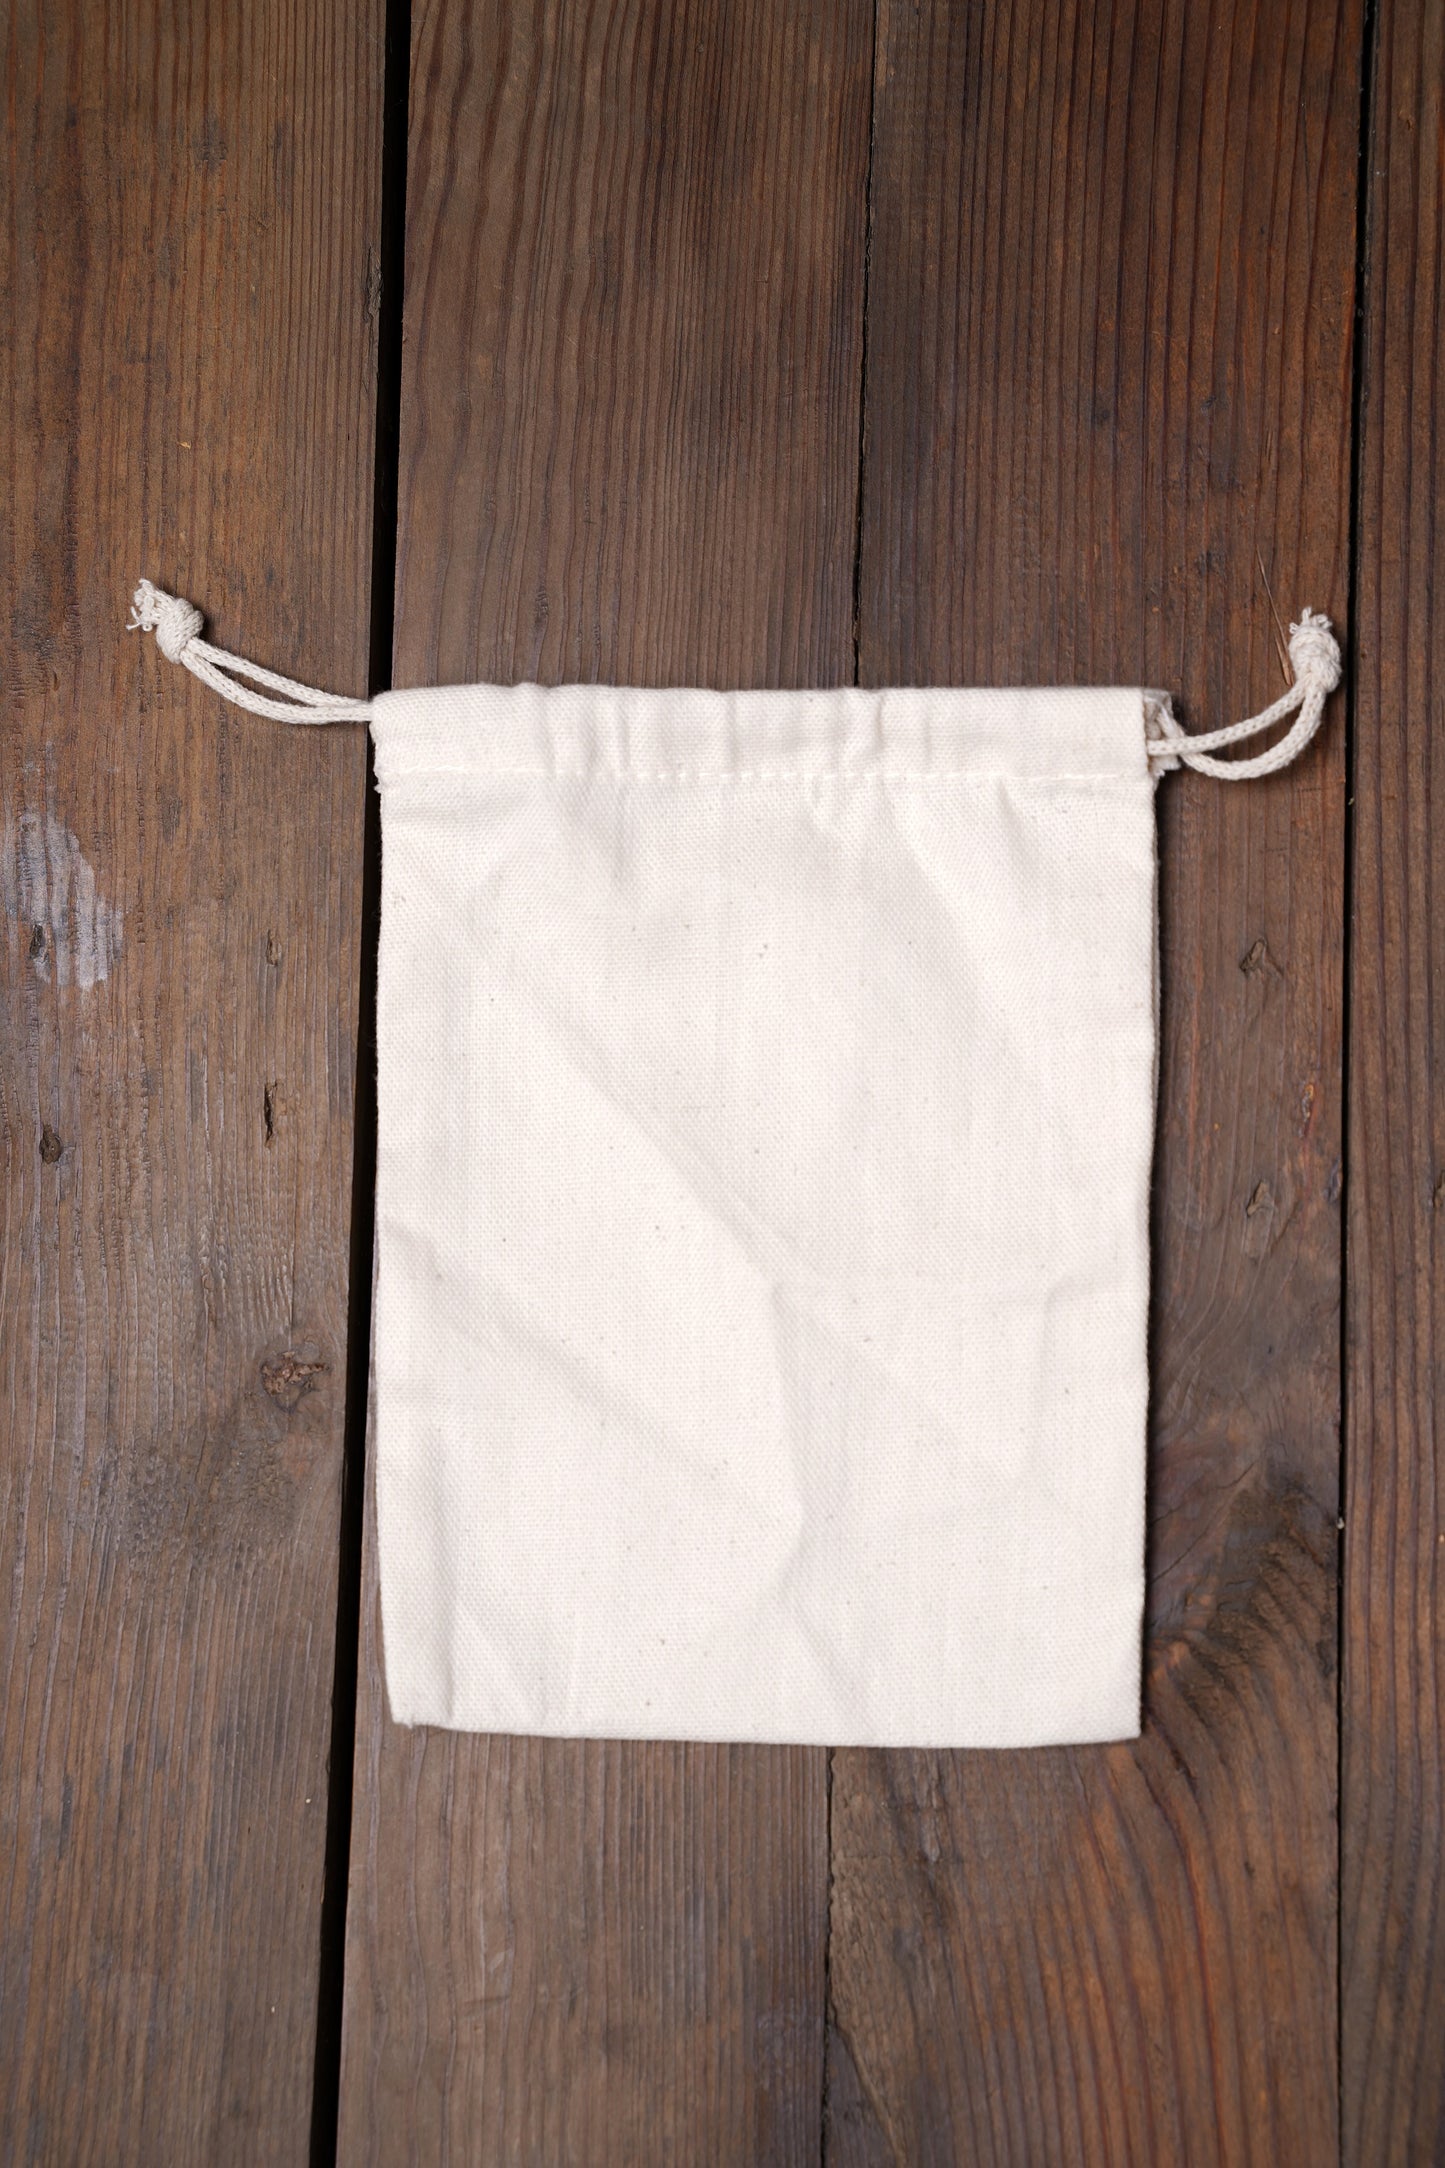 8x12 Inches Reusable Eco-Friendly Double Drawstring Cotton CANVAS Bags Natural Color